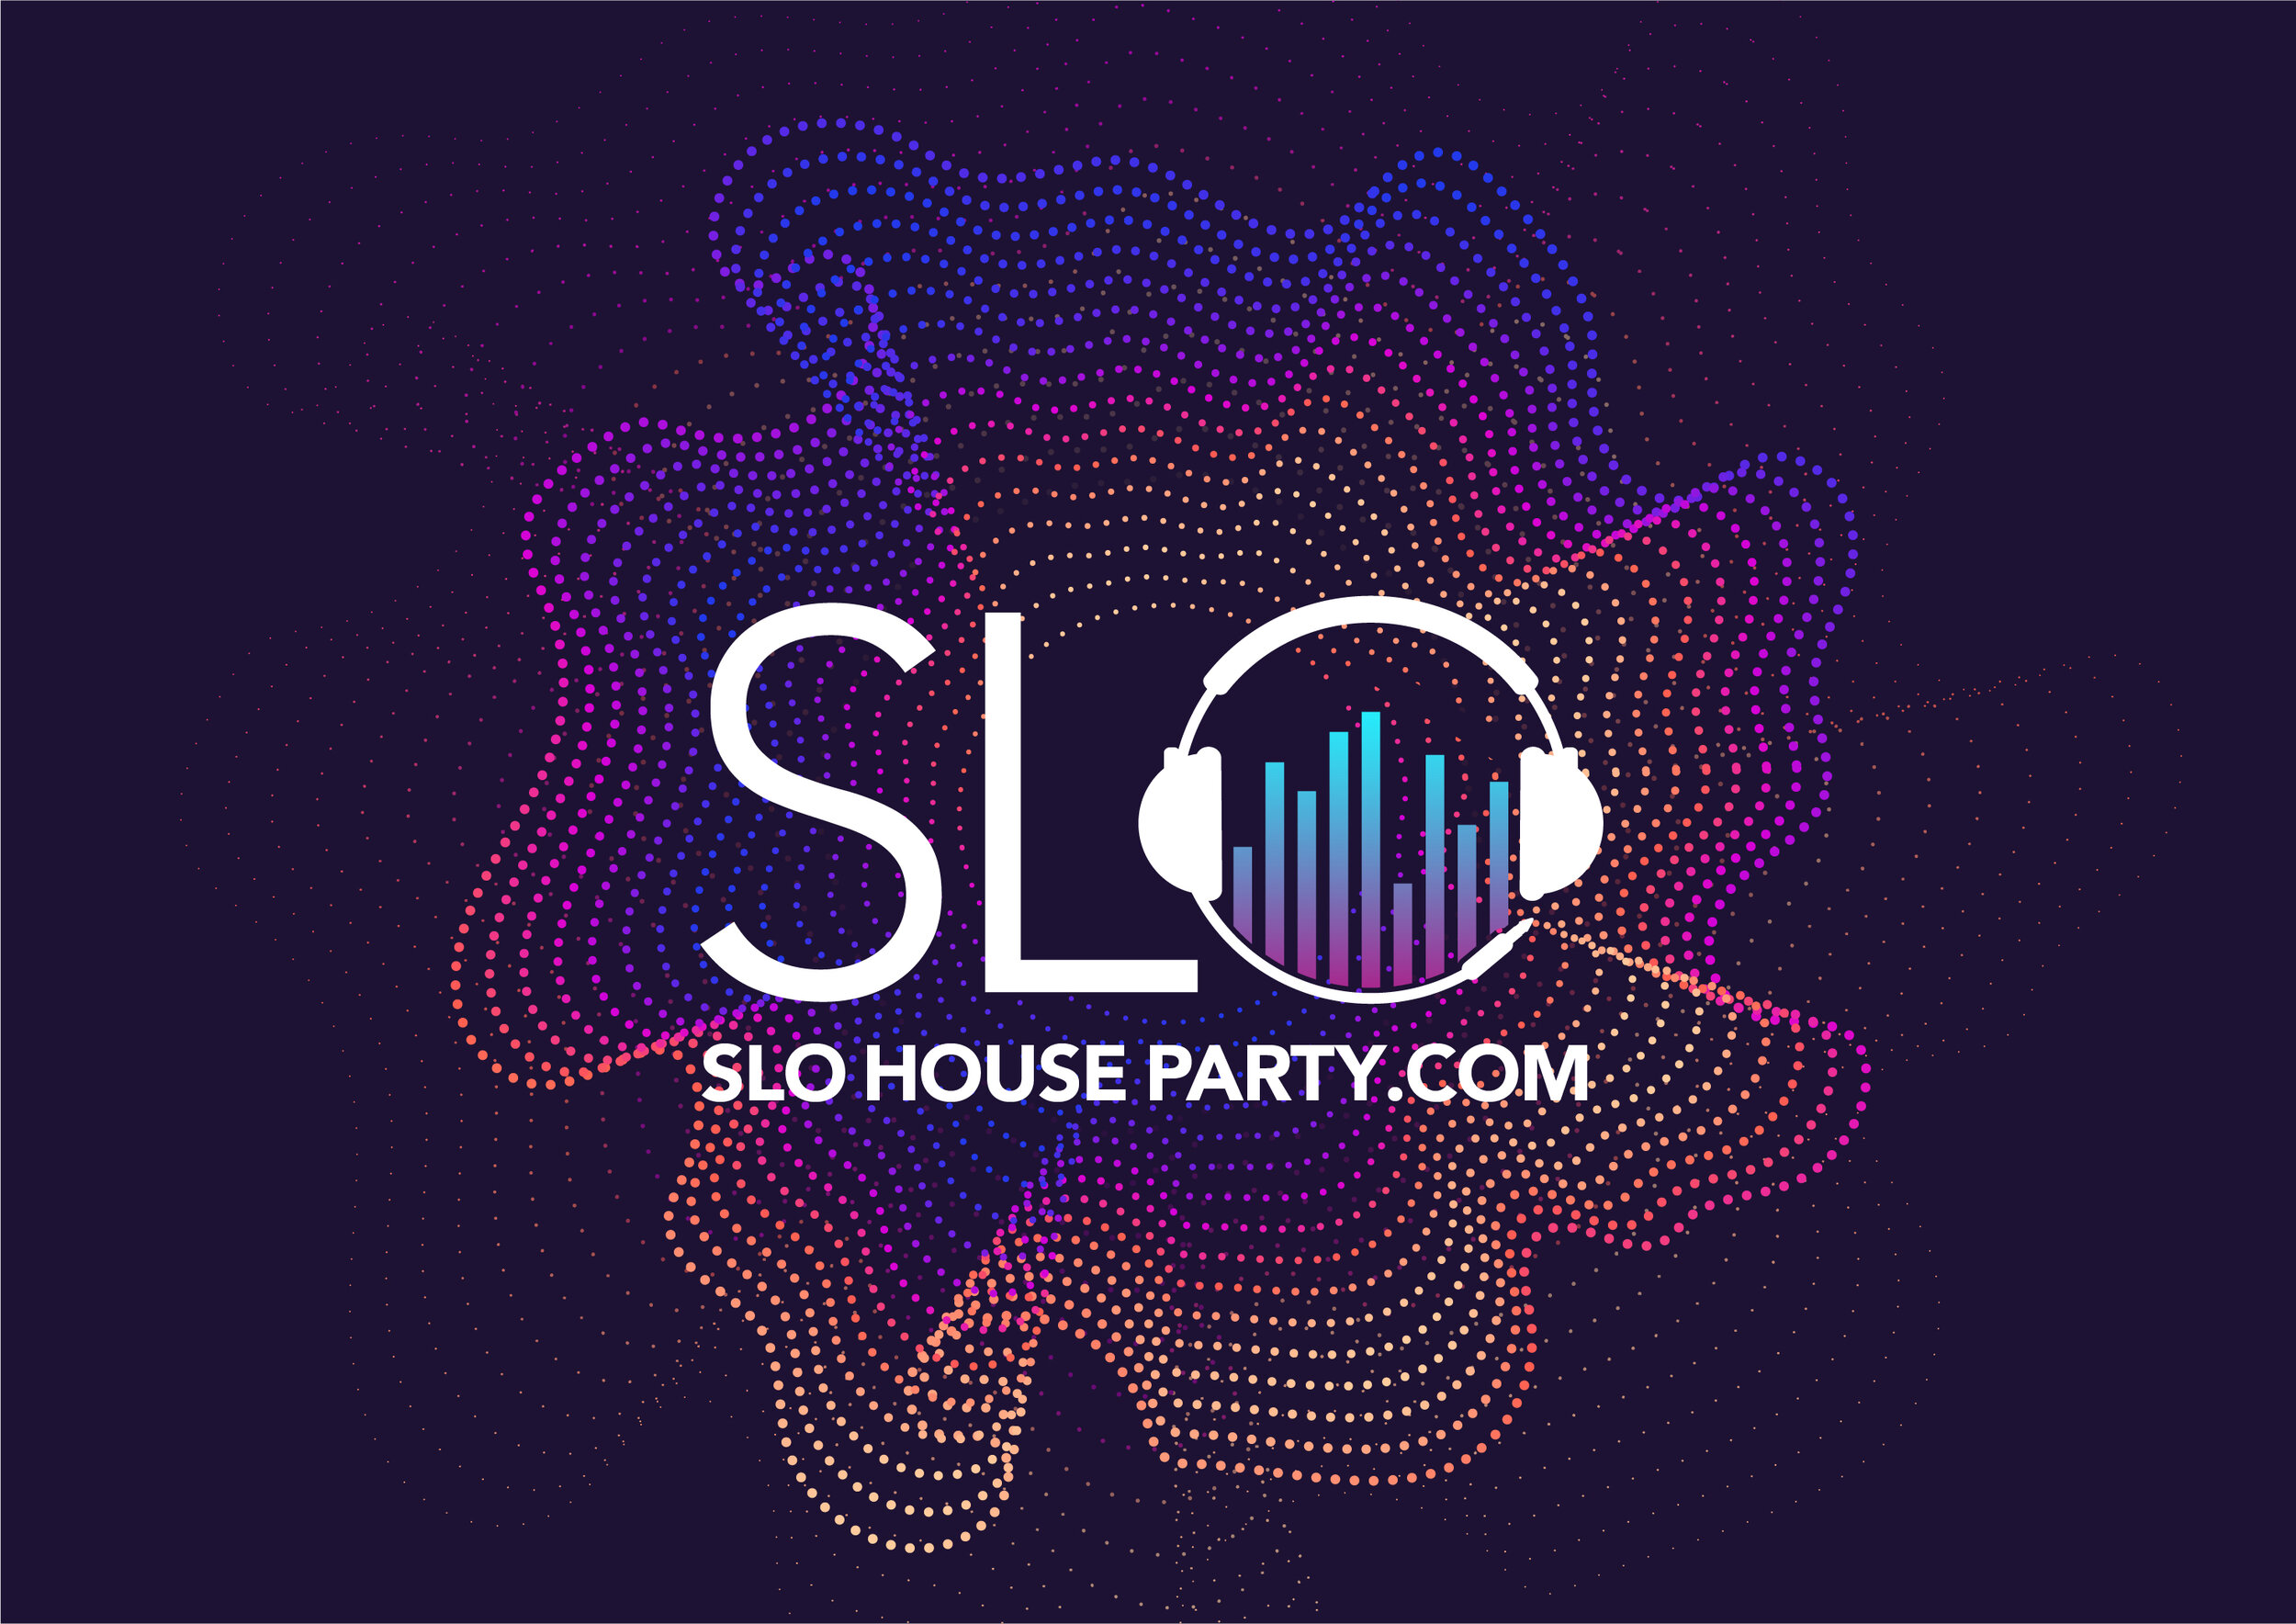 SLO_HOUSE_PARTY_graphic.jpg